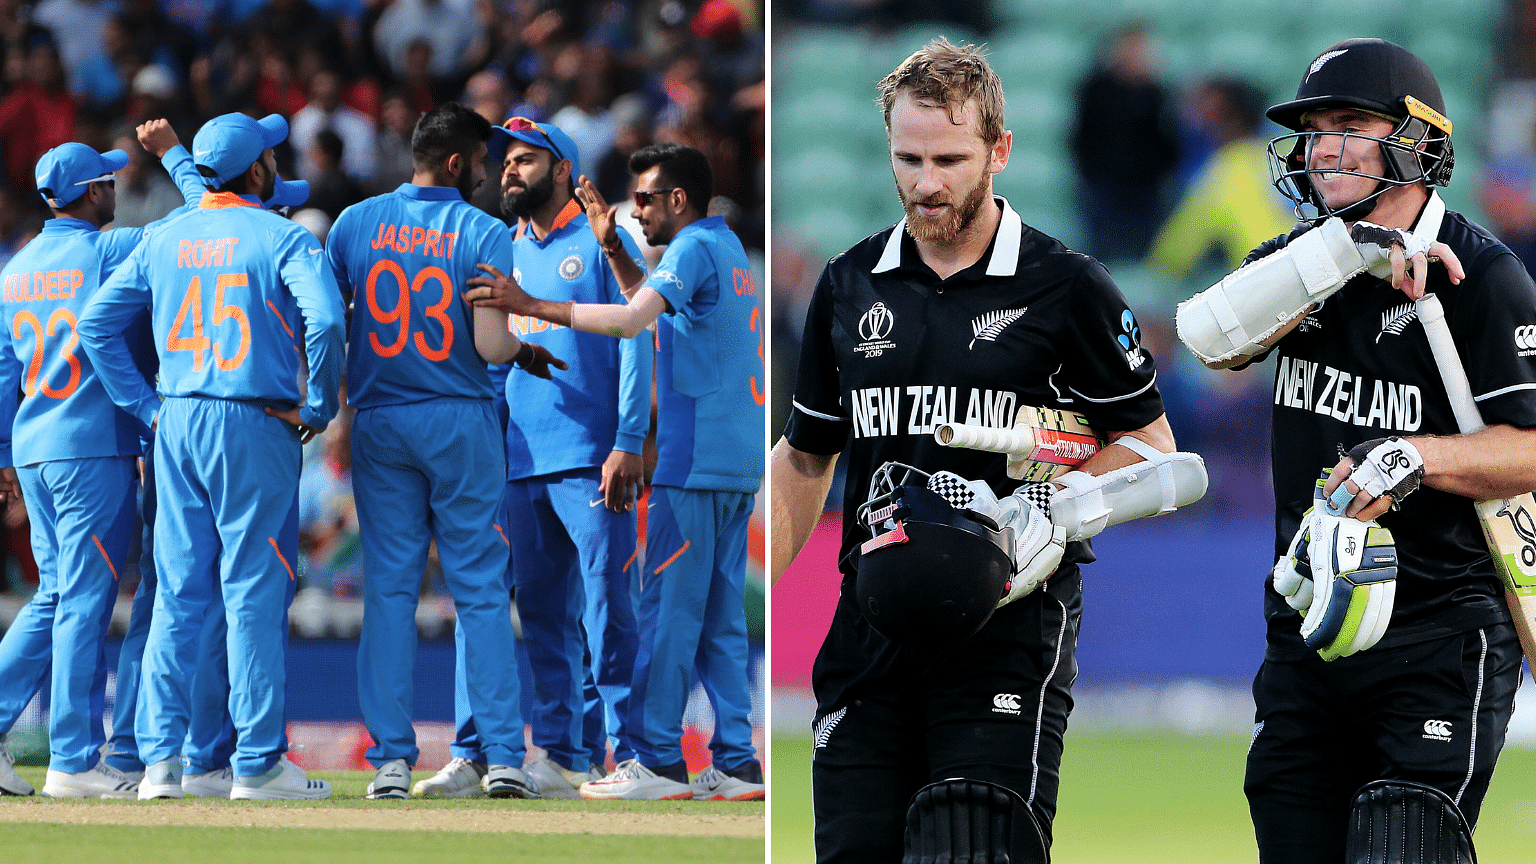 New Zealand have had a good record against India at global events.